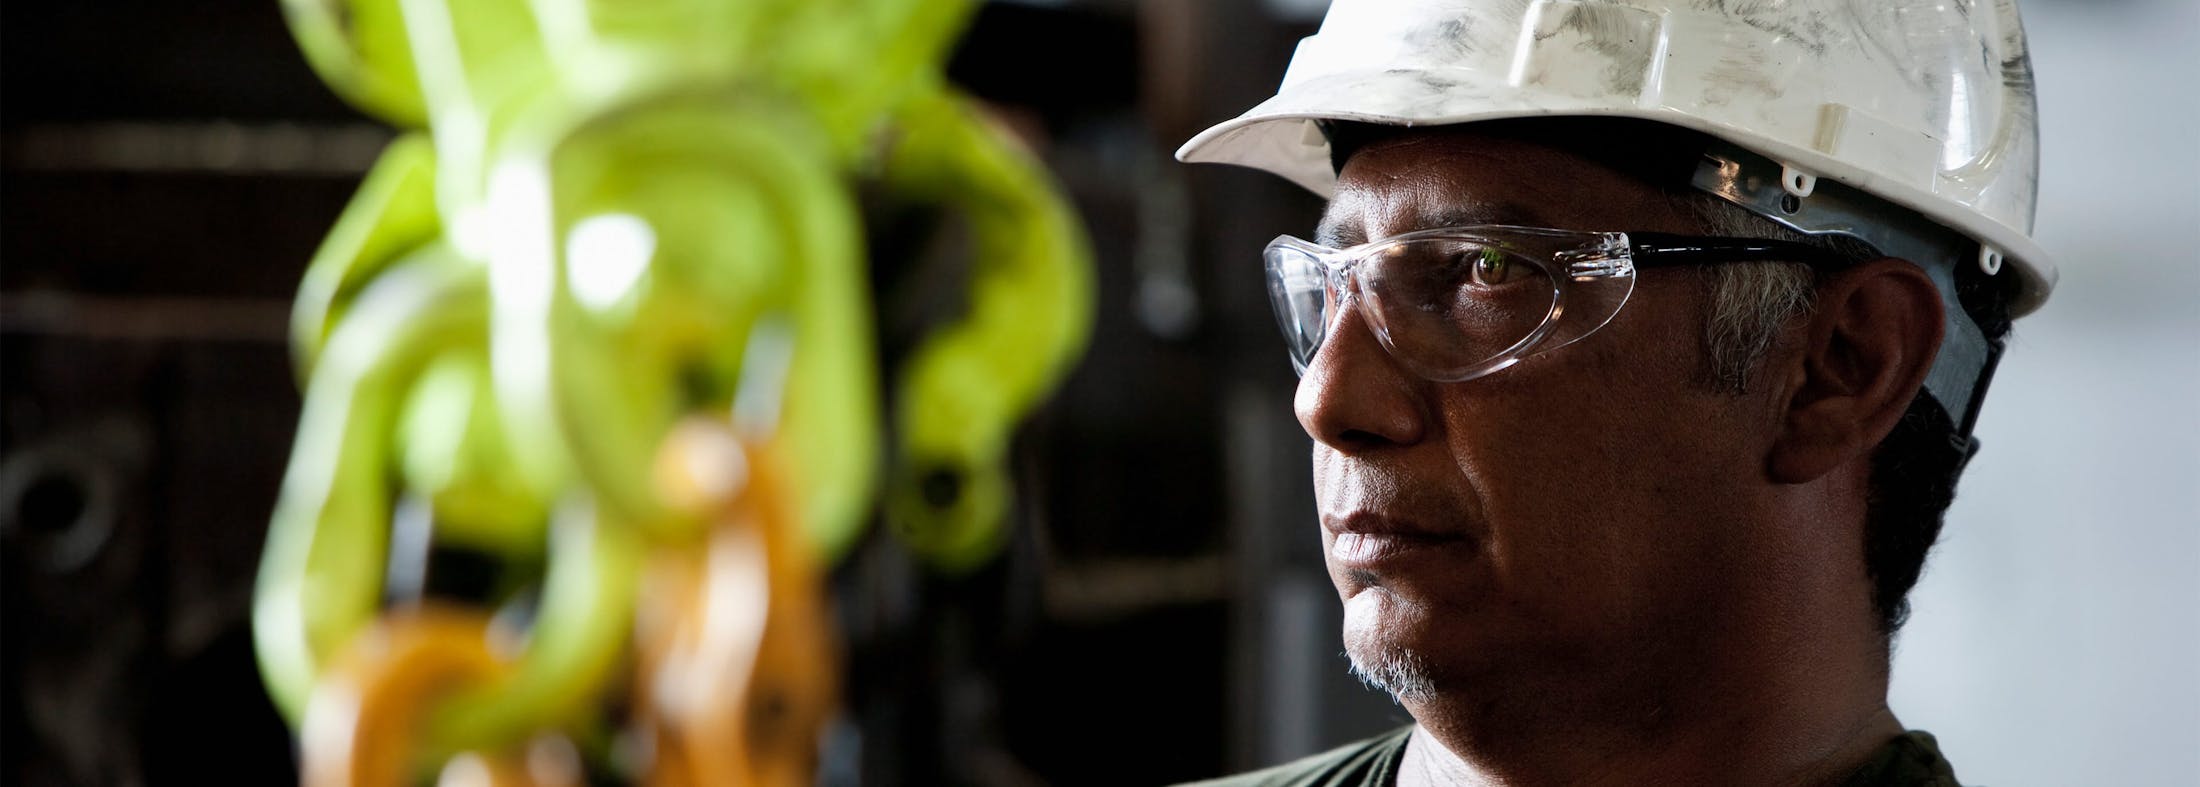 Man wearing a hard hat and safety glasses